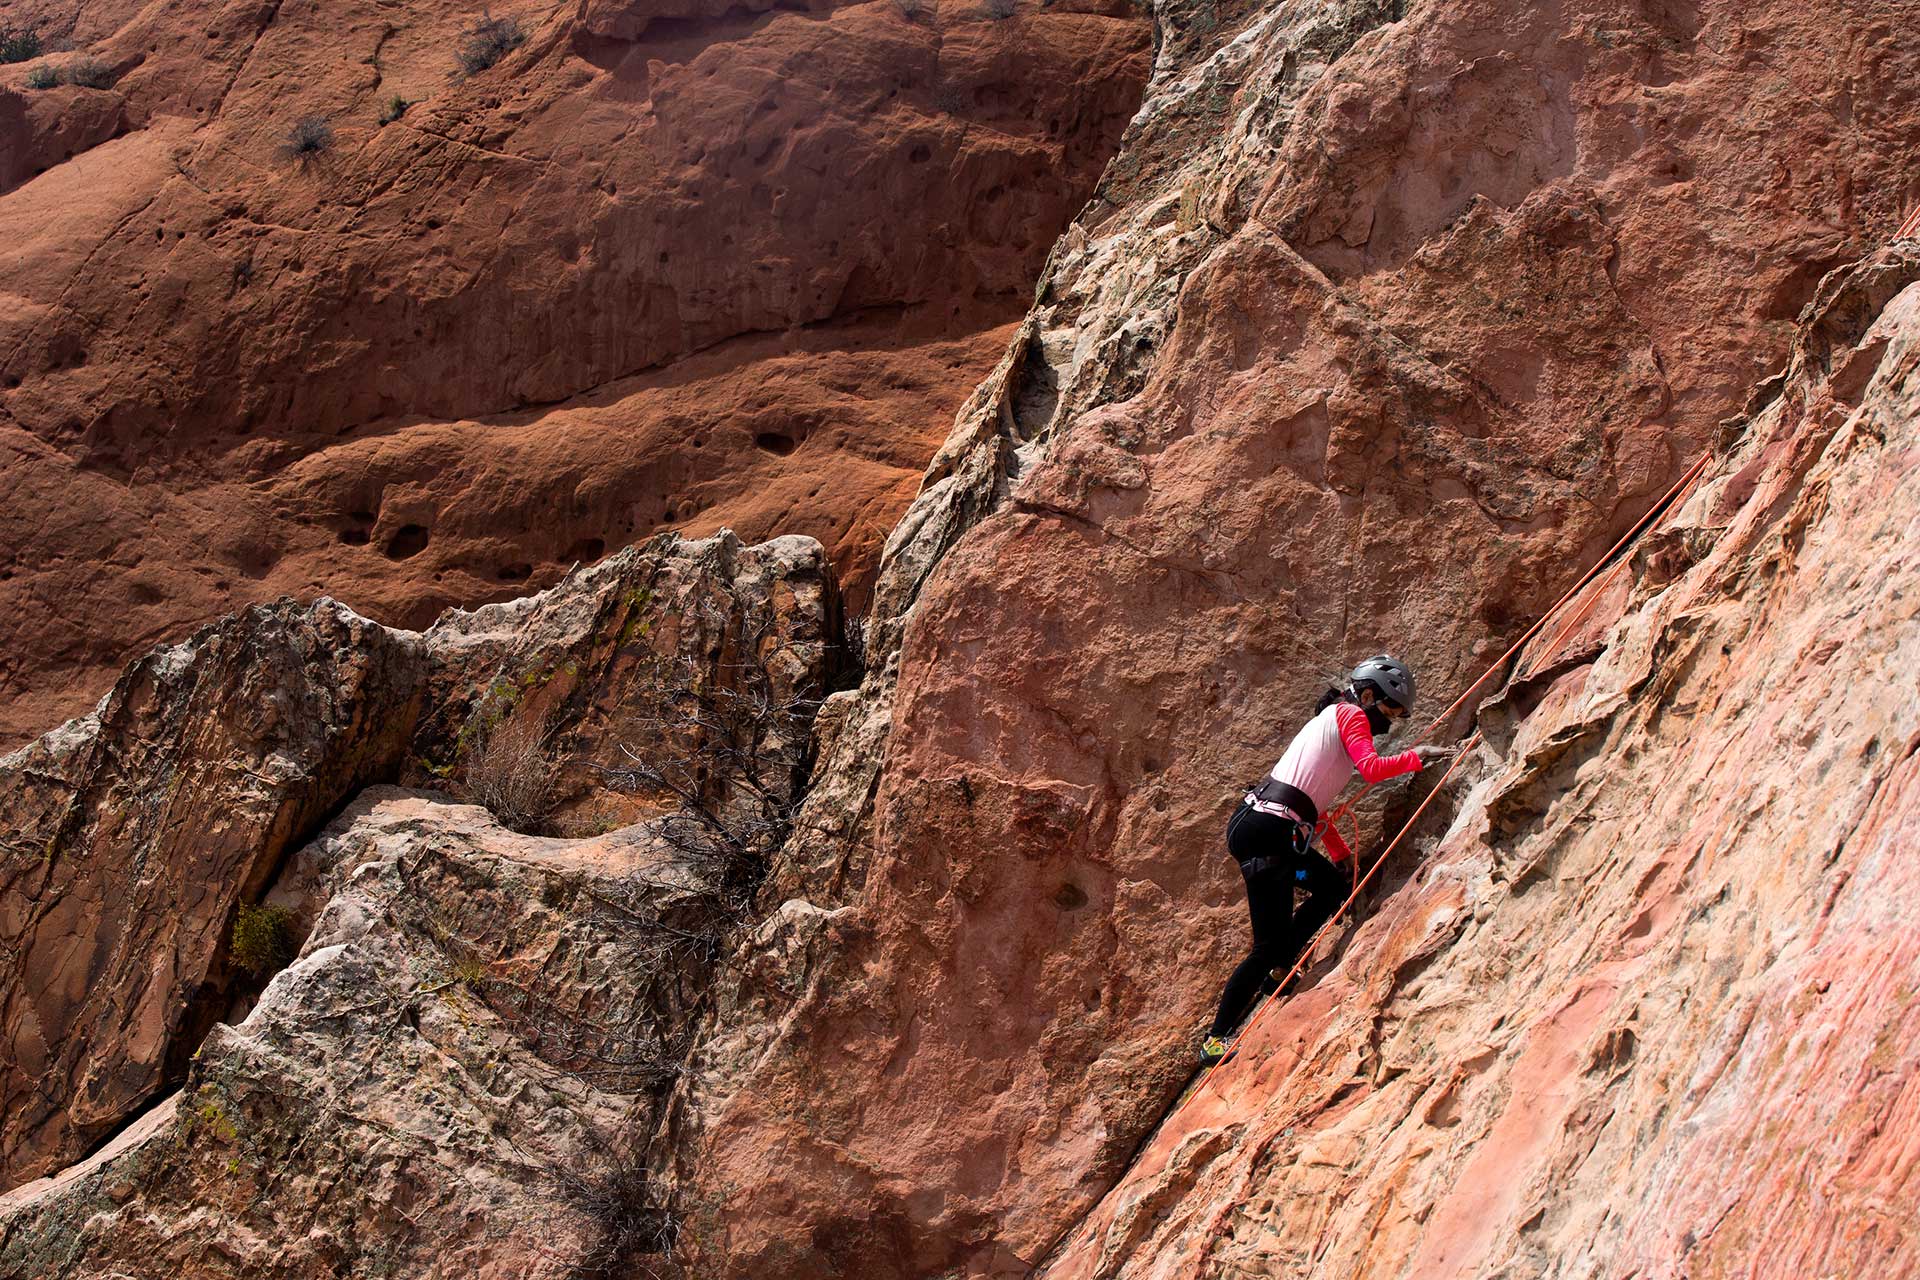 <b>Amanda Martin '23</b> pulls herself up to the next hold while climbing Kindergarten Wall at Garden of the Gods.